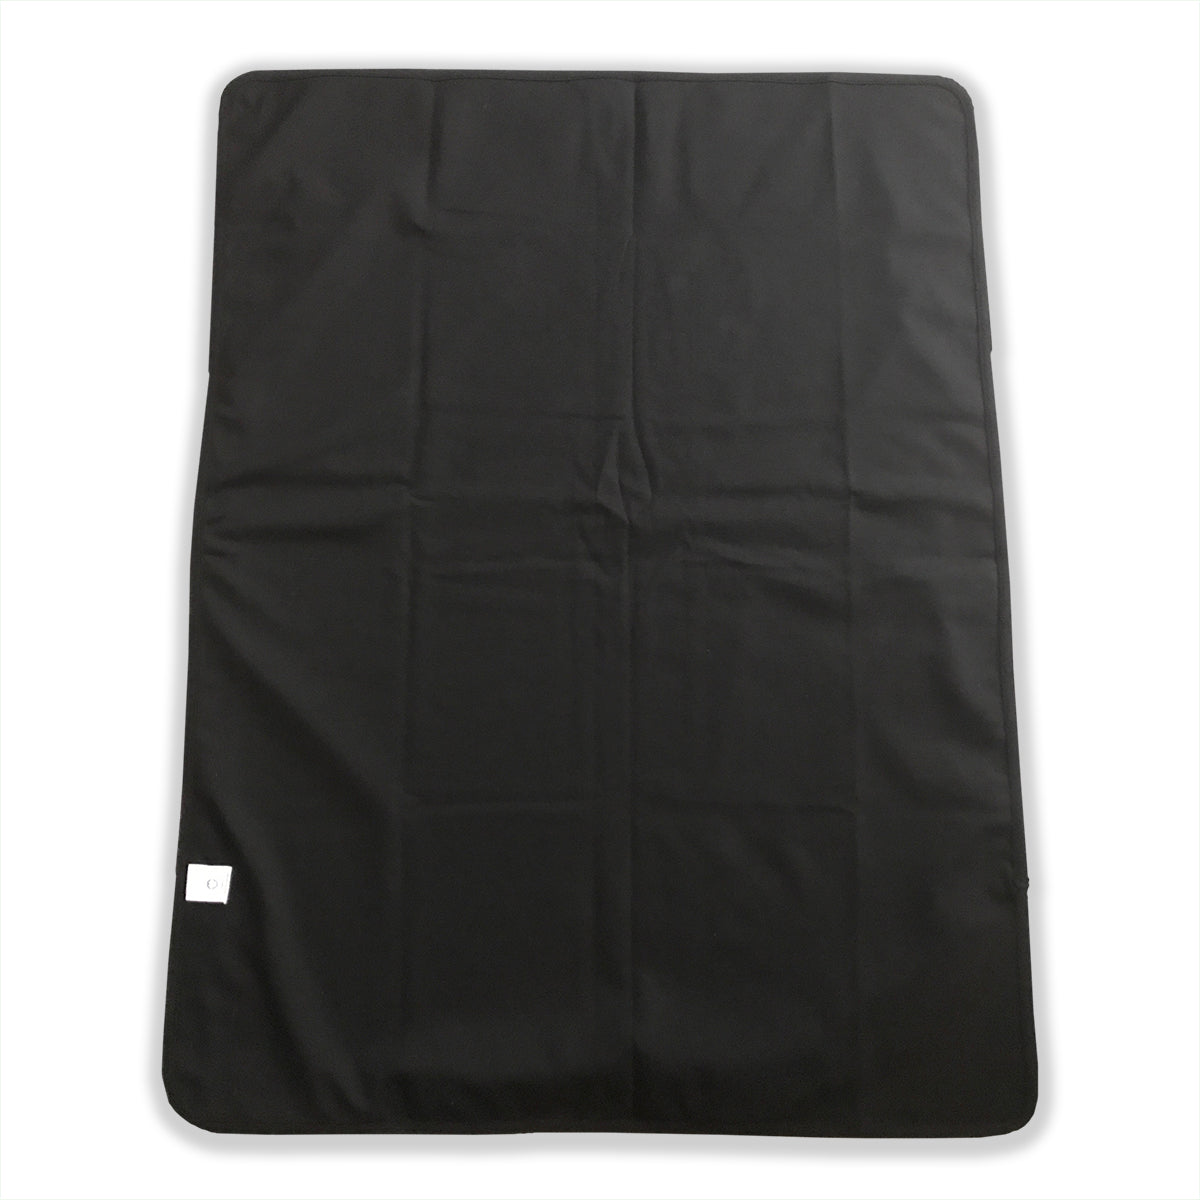 Lazy Baby Organic Cotton Black and White Blanket